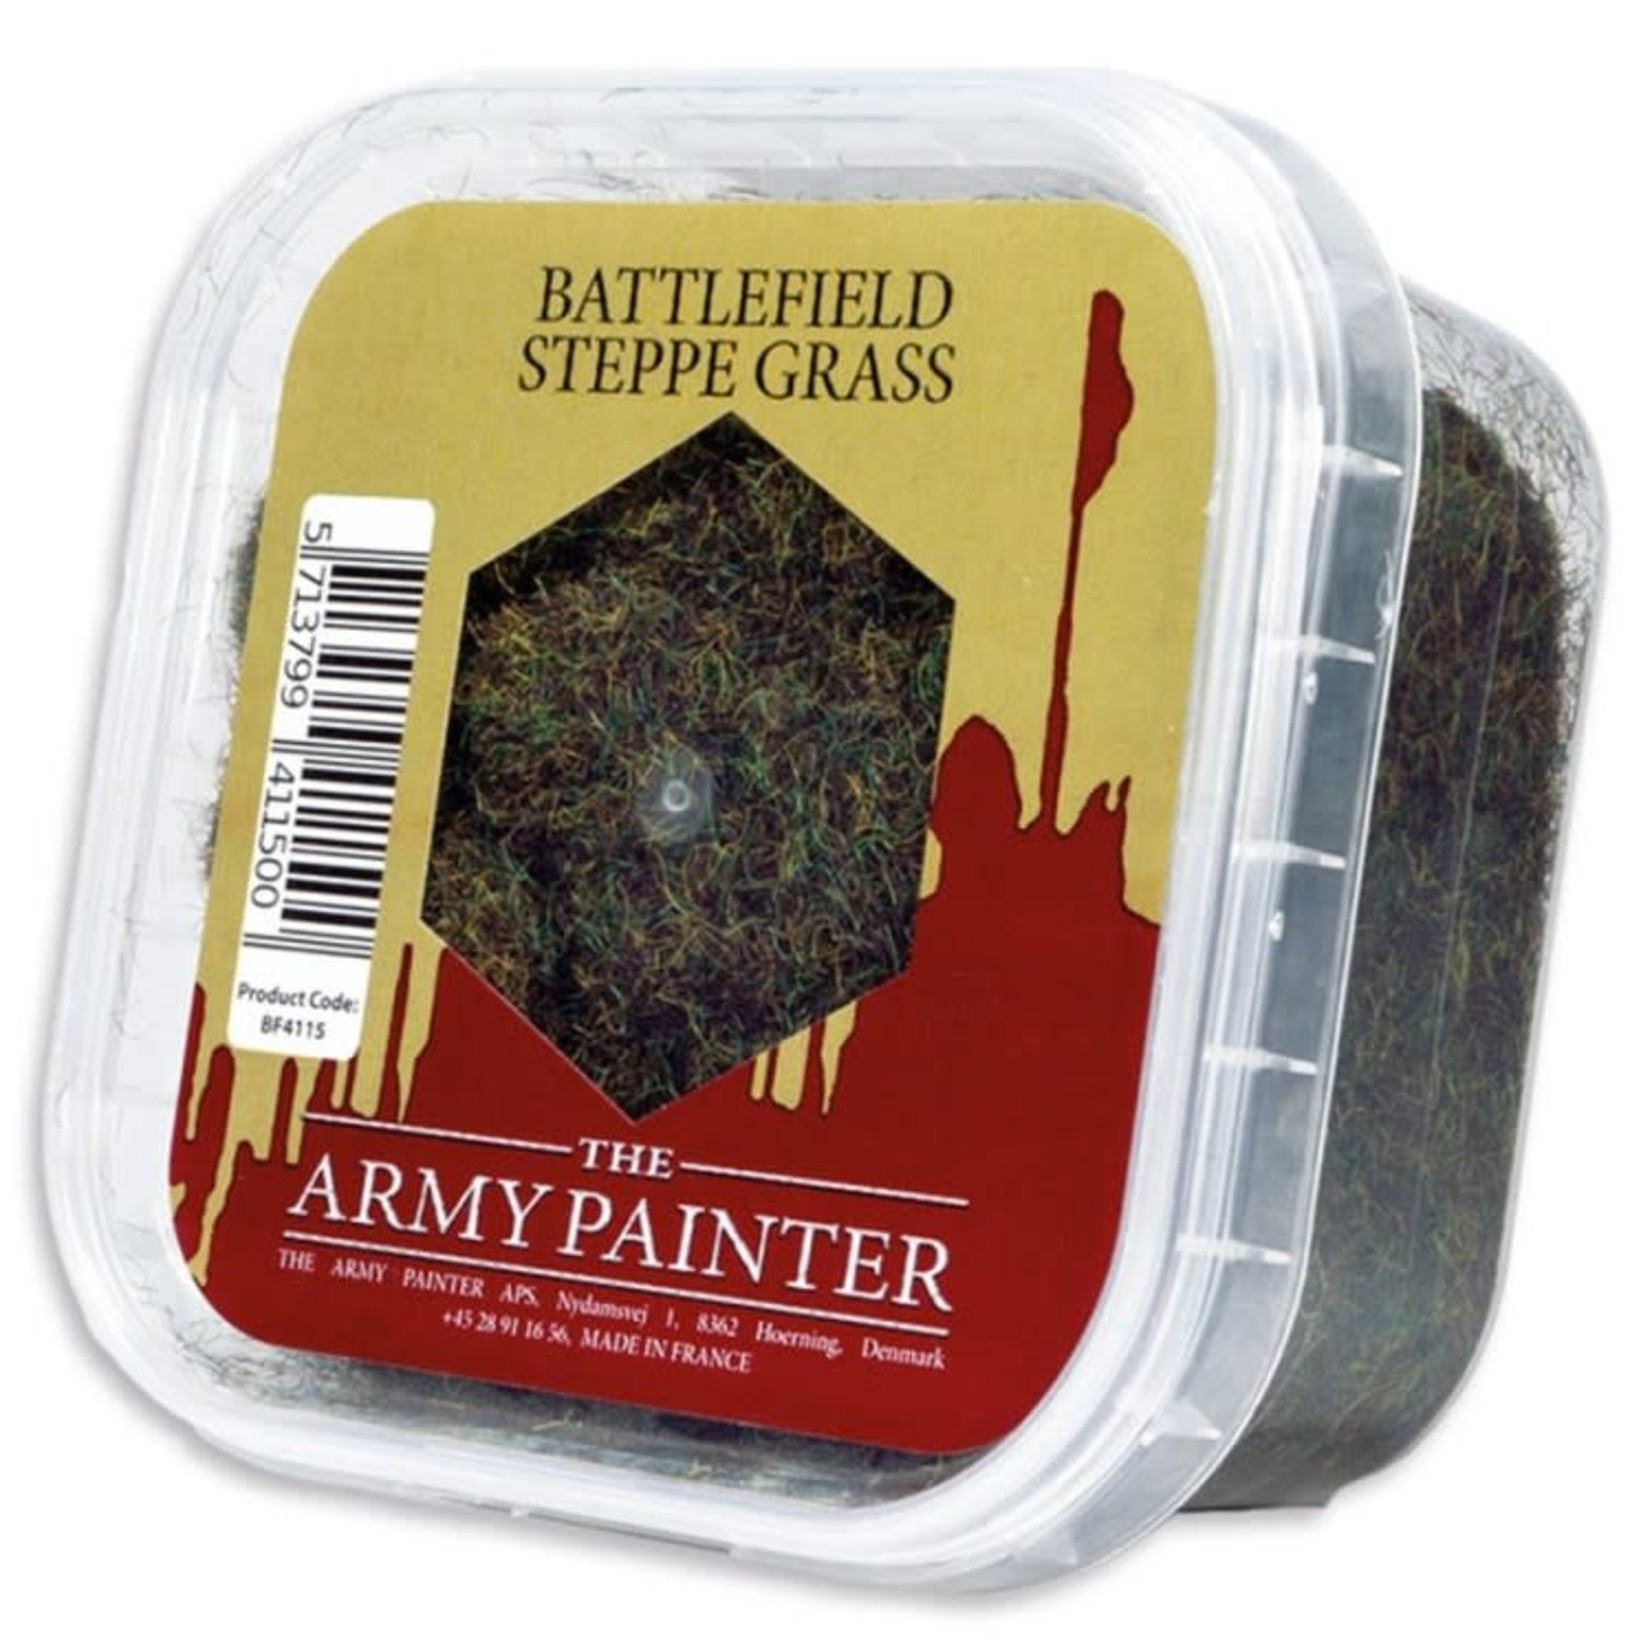 The Army Painter The Army Painter Battlefield Steppe Grass